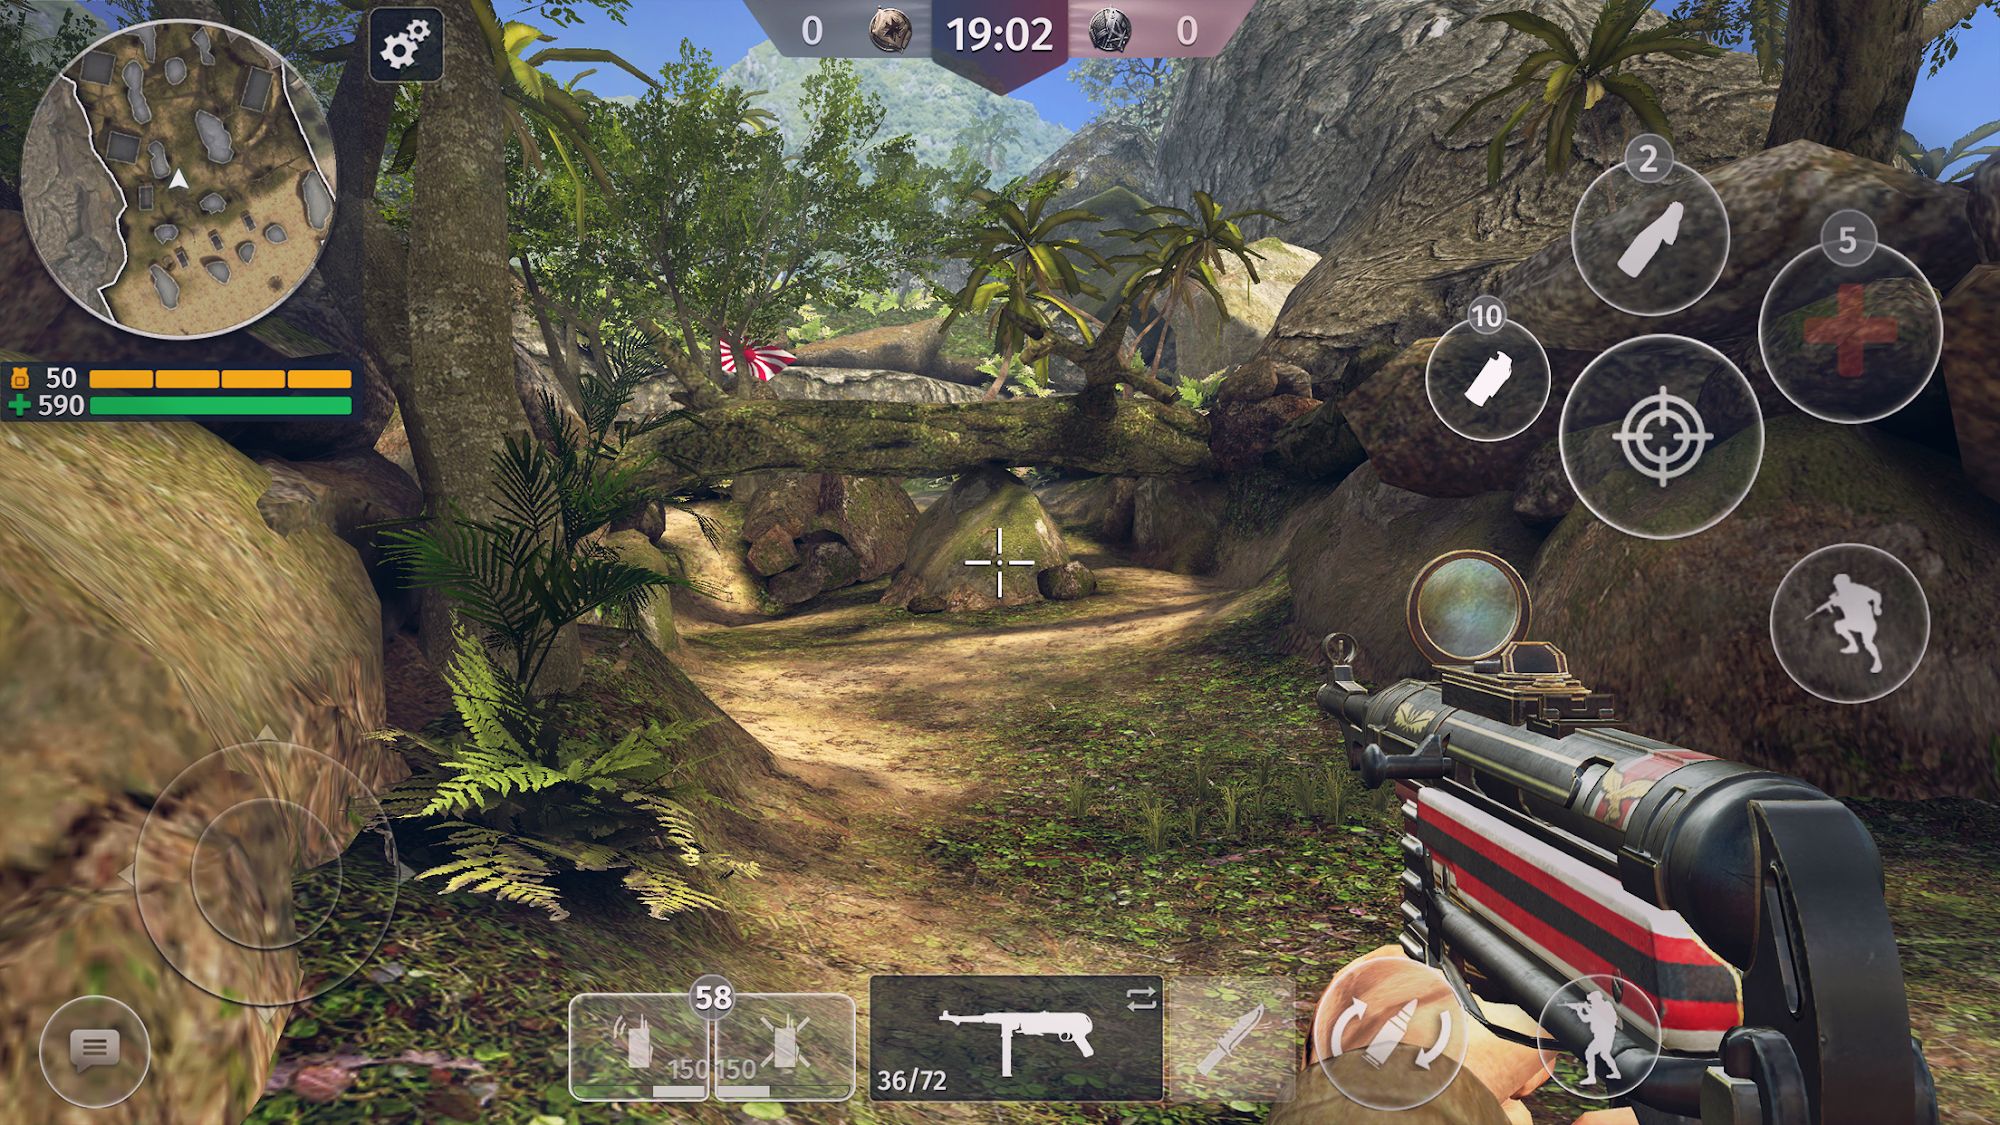 World War 2 - Battle Combat (FPS Games) for Android